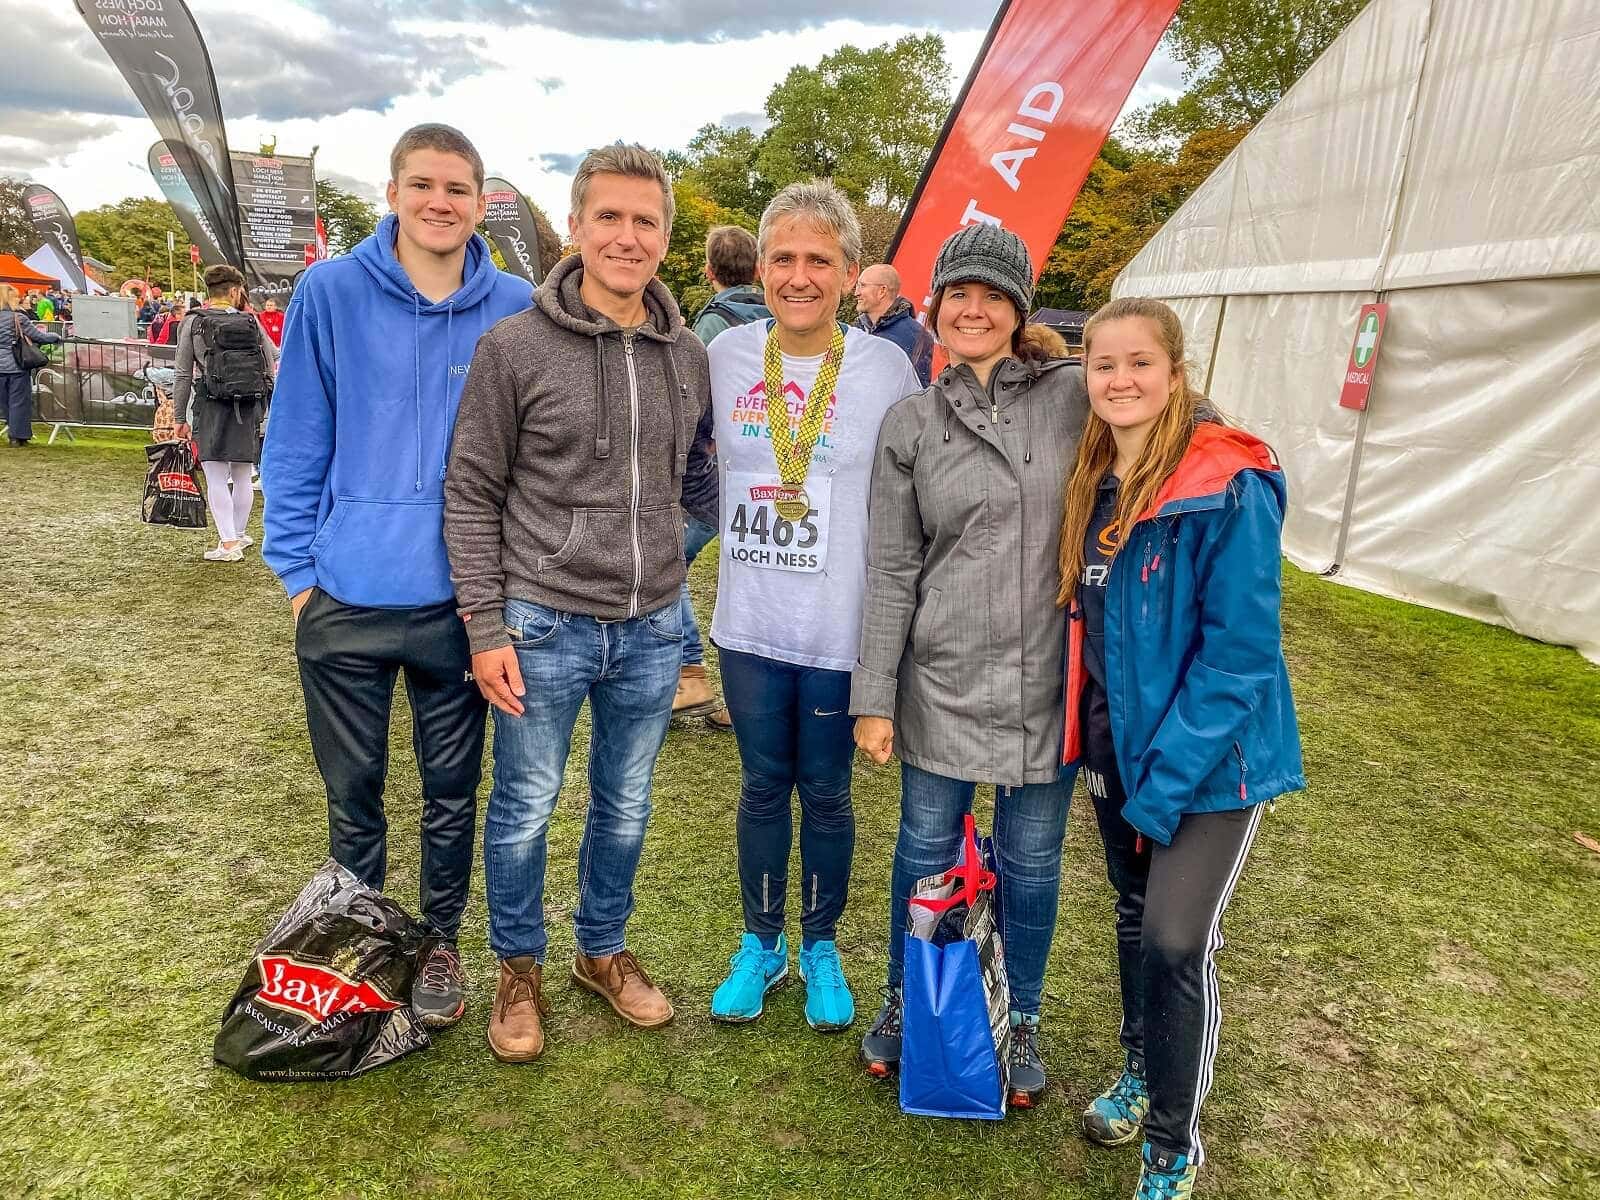 Victor Marley, president of the Seventh-day Adventist Church in Norway, with his family after the October 6, 2019, marathon near Loch Ness. [Photo: Miranda Marley/ADAMS]